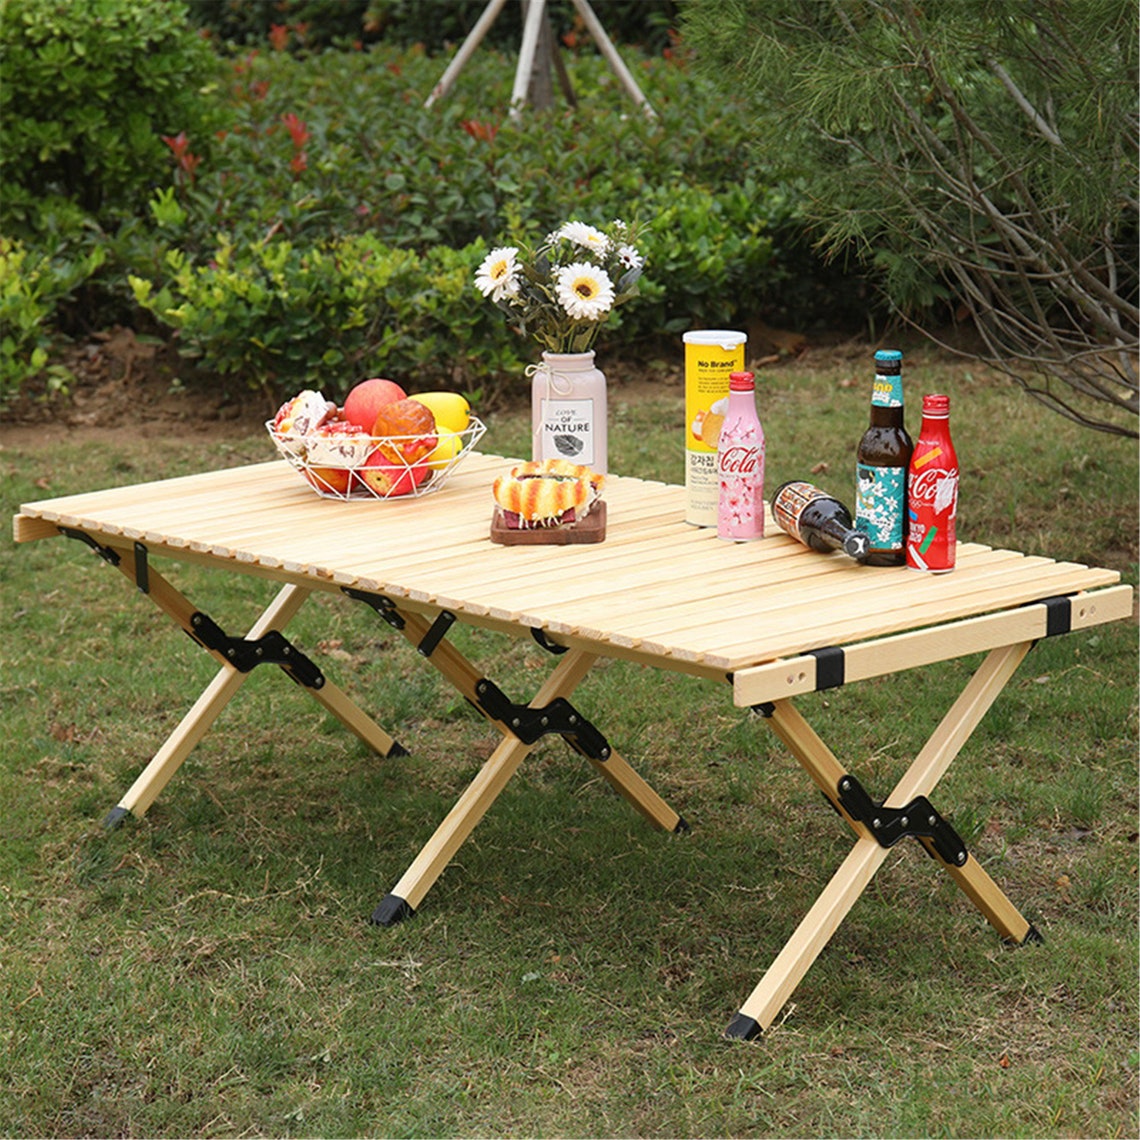 Wooden outdoor folding camping picnic table